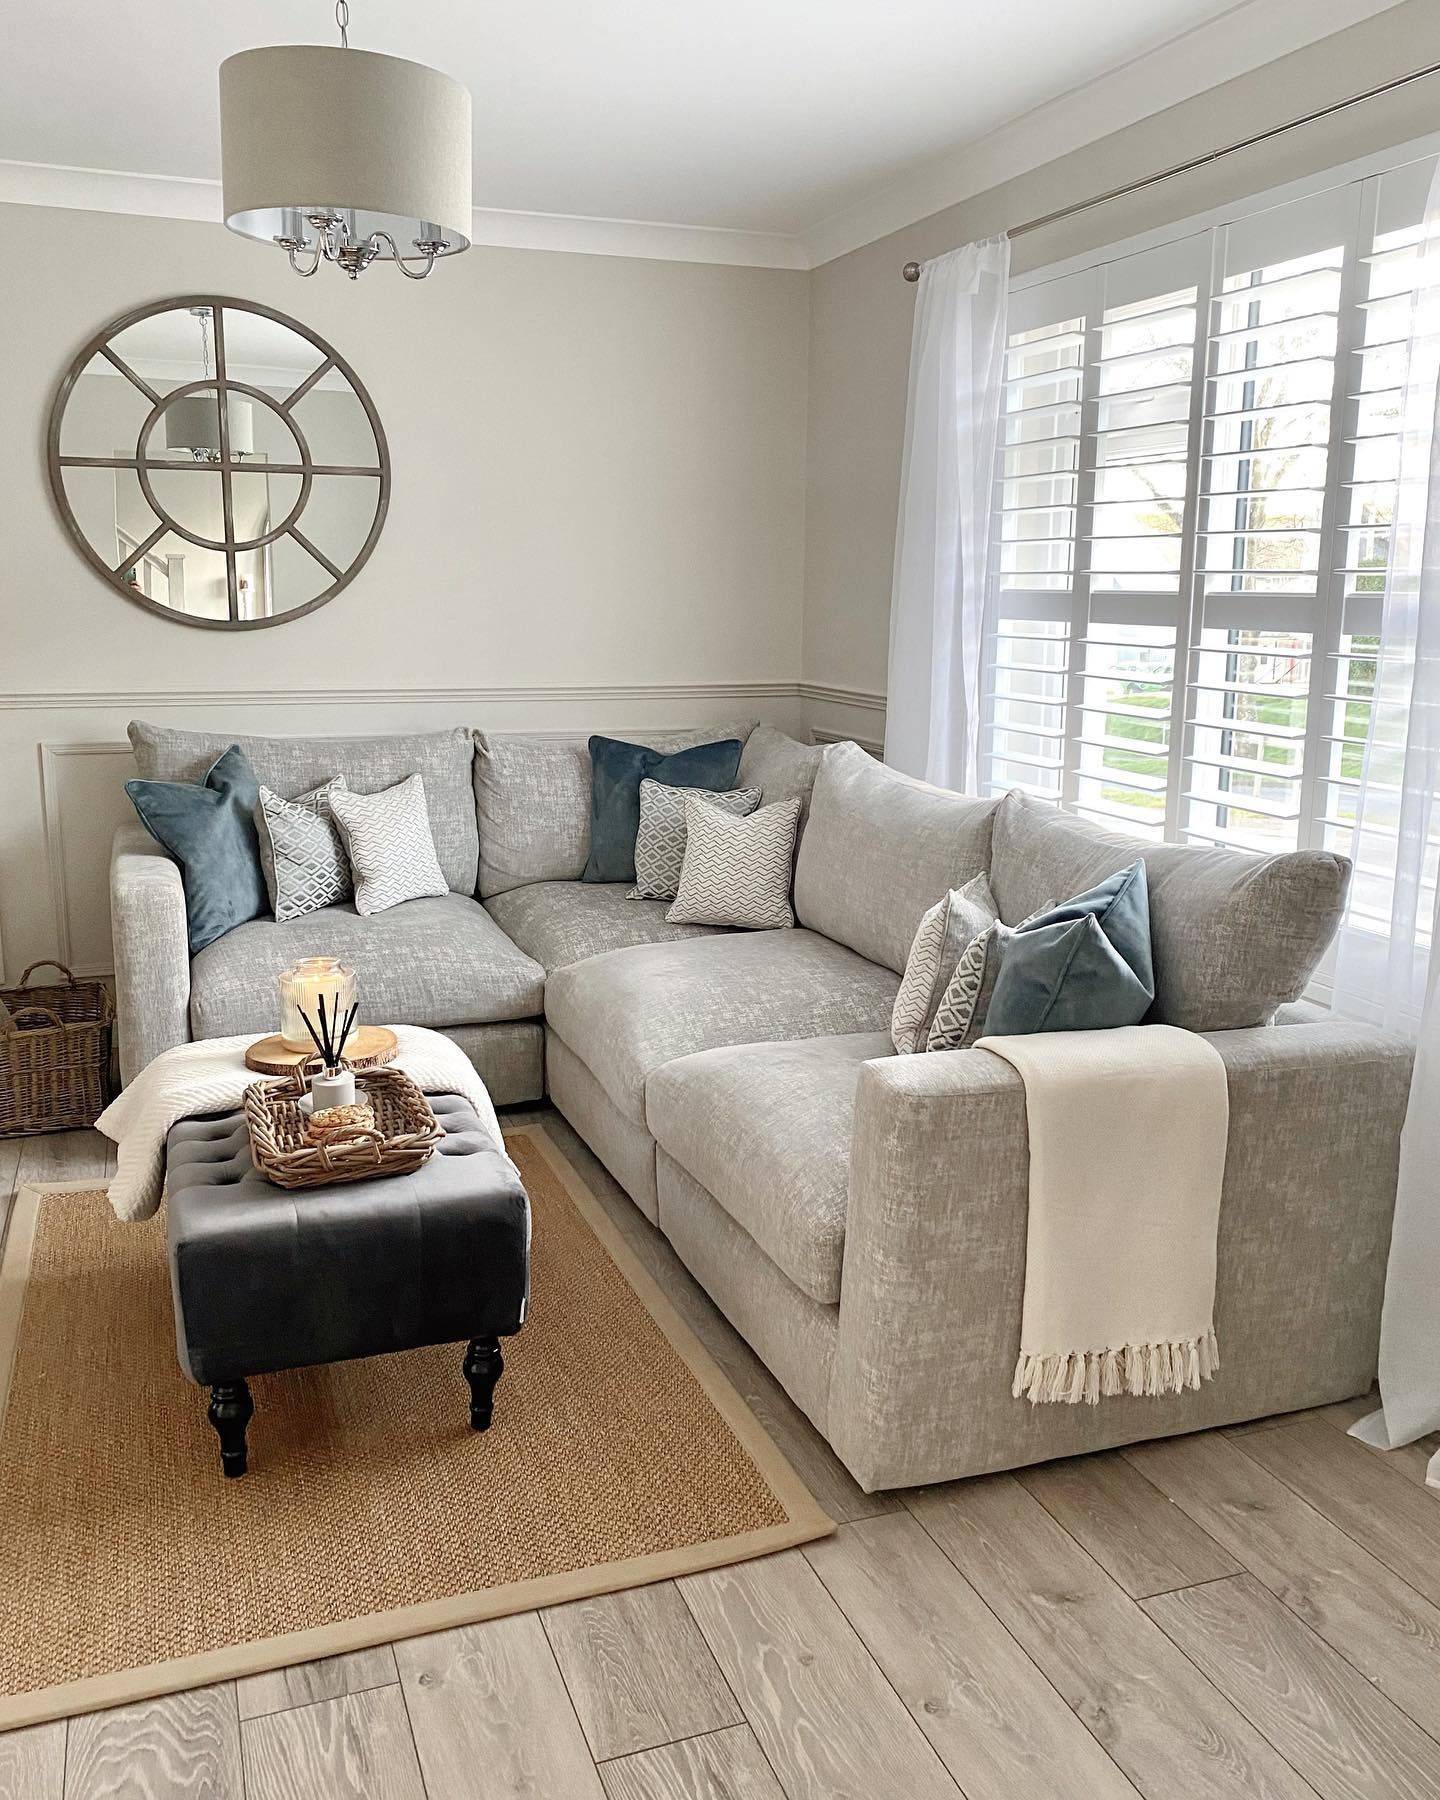 Choosing The Right Sofa For Your Home | The Oak Furnitureland Blog Inside Sofas In Cream (View 10 of 15)